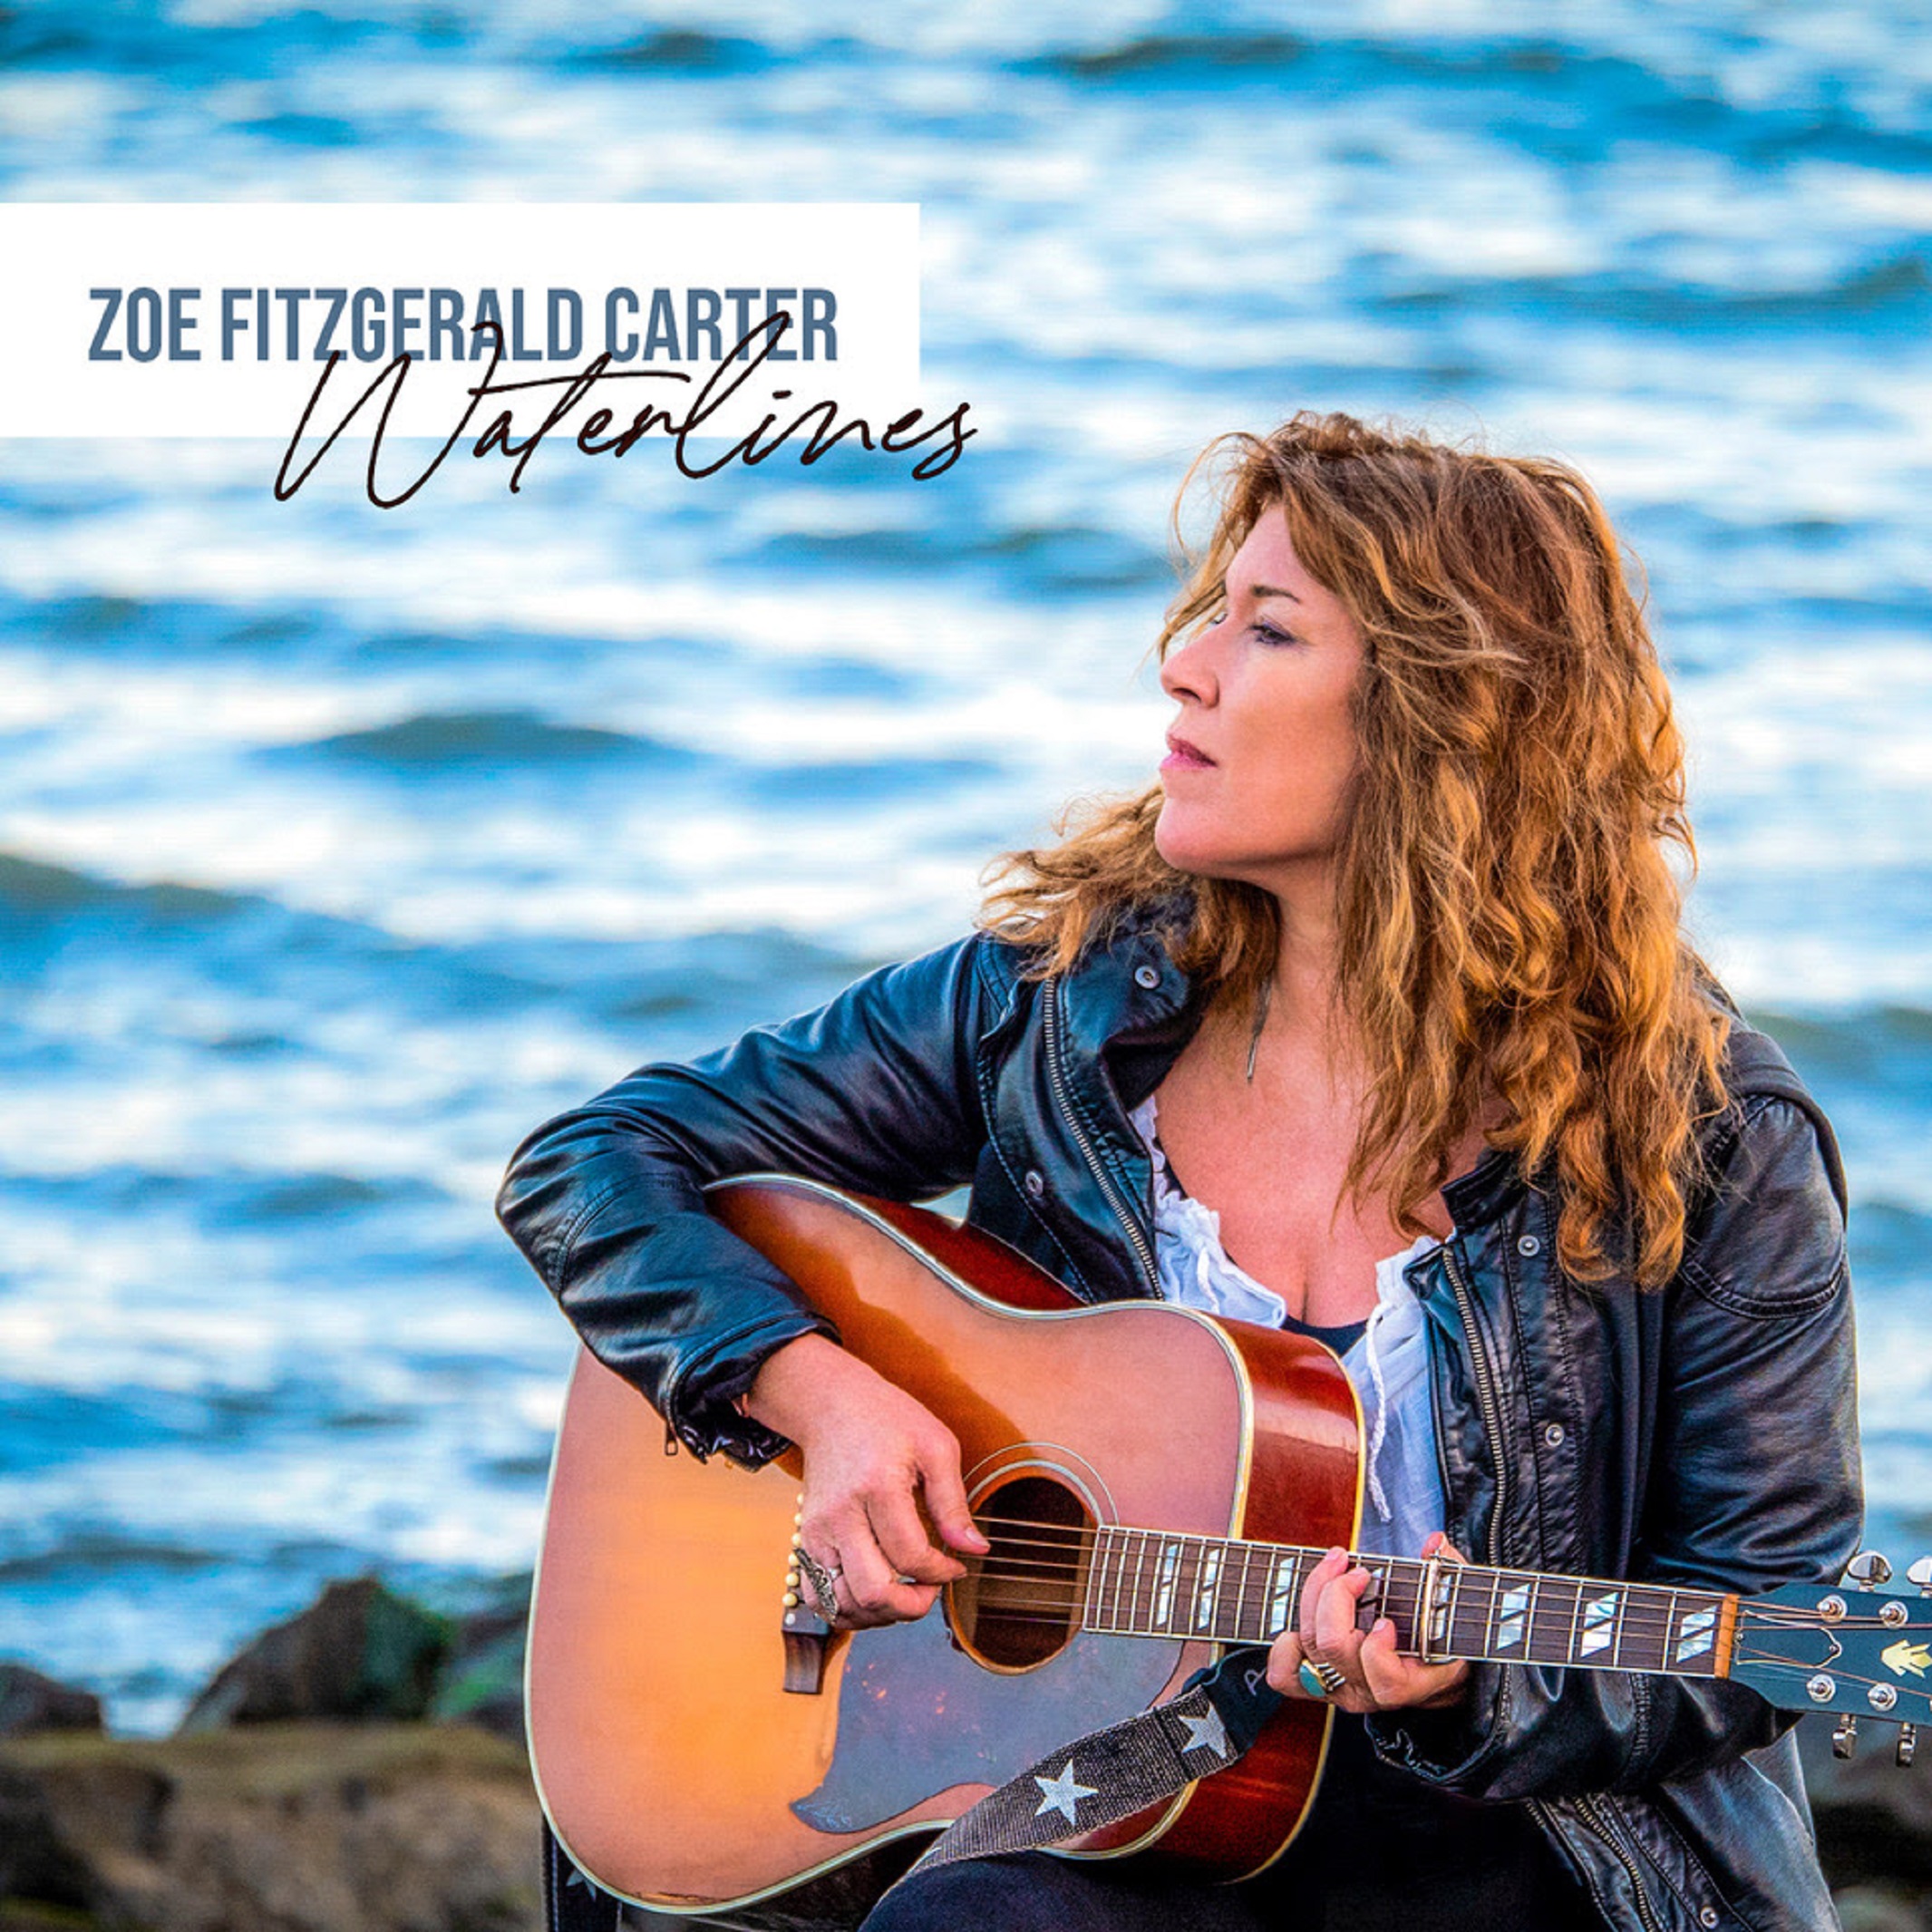  ZOE FITZGERALD CARTER AND FRIENDS LIVE AT BERKELEY’S FREIGHT & SALVAGE MARCH 22ND